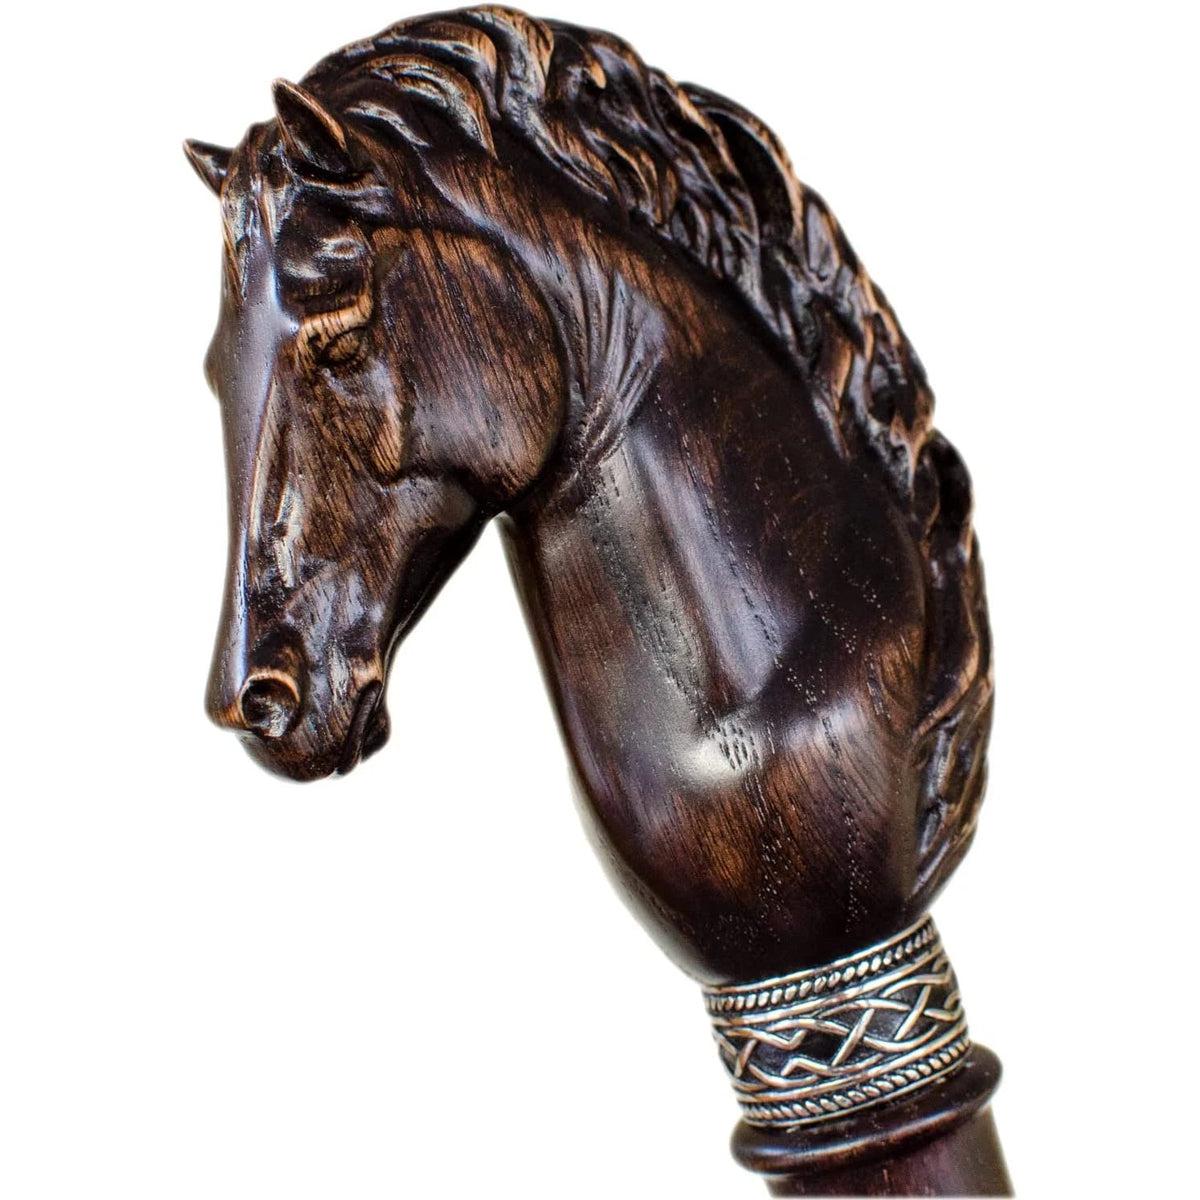 Fashionable Custom Carved Wooden Horse Head Cane or Walking Stick